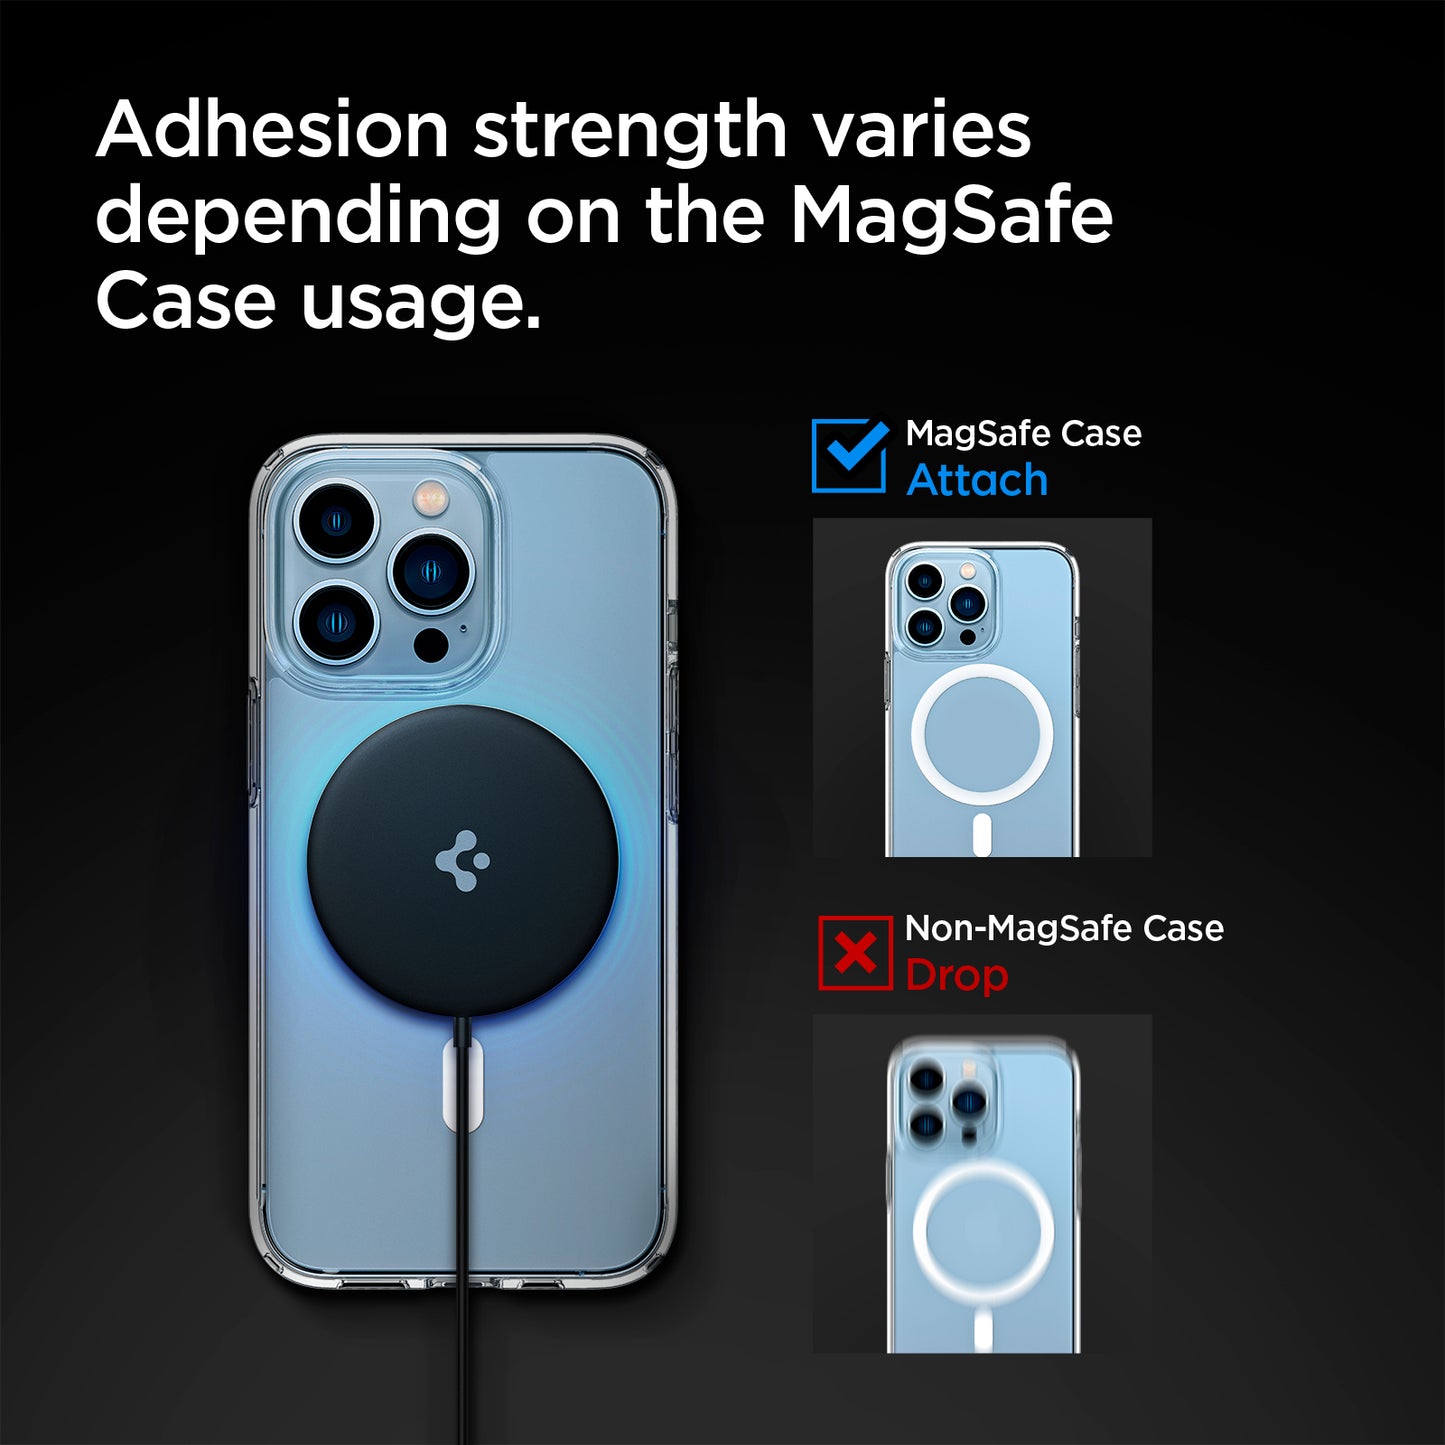 ACH02190 - ArcField™ Magnetic 7.5W Wireless Charger PF2009 (MagFit) in Black showing the Adhesion strength varies depending on the Magsafe Case usage. Showing 3 device with strong hold comparison.